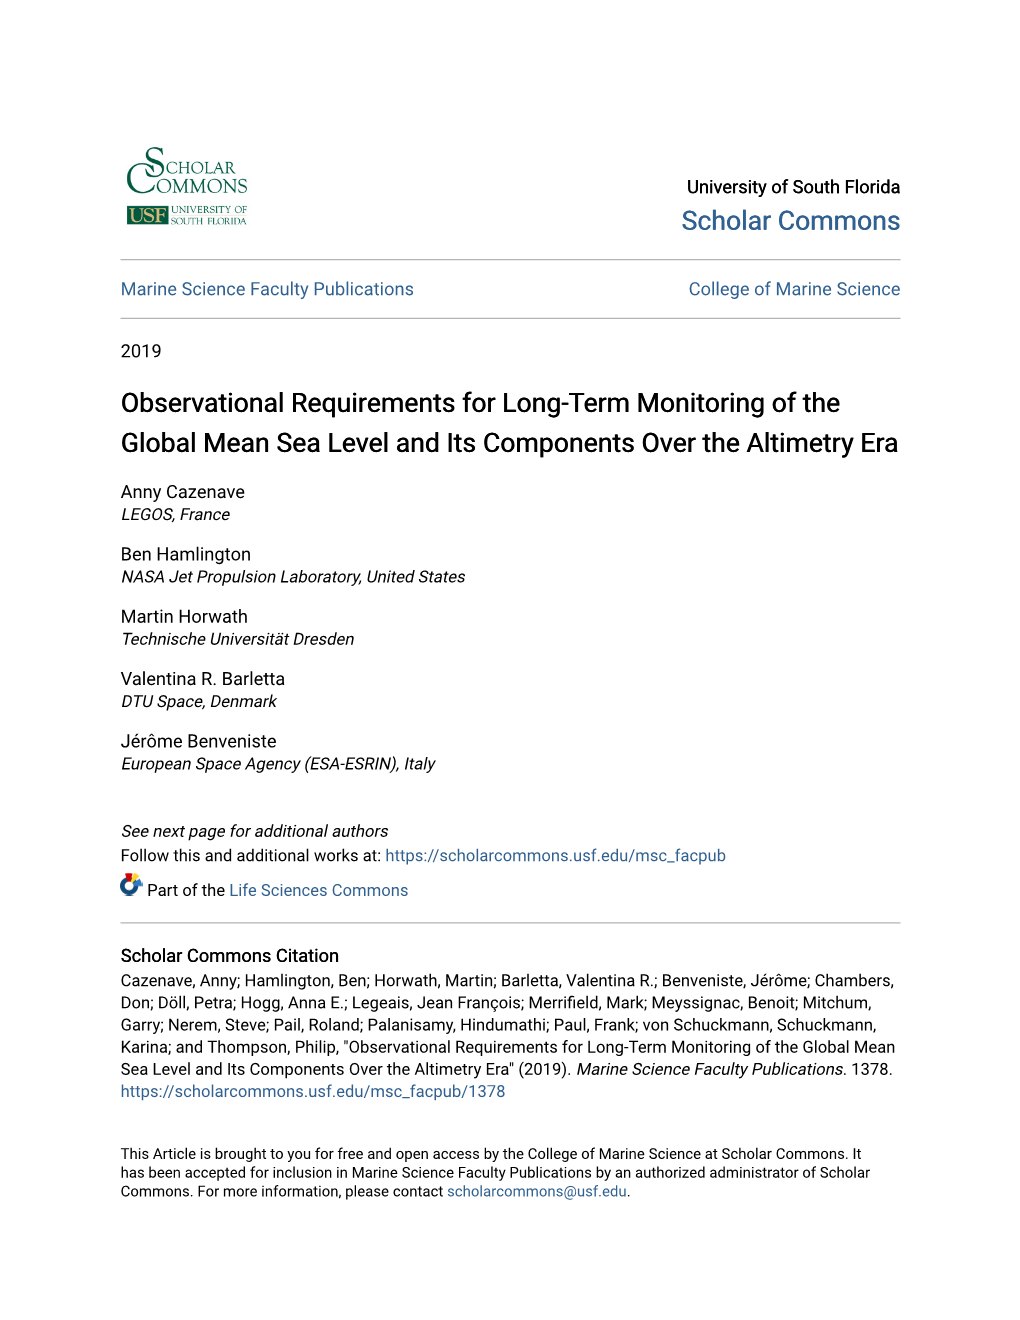 Observational Requirements for Long-Term Monitoring of the Global Mean Sea Level and Its Components Over the Altimetry Era